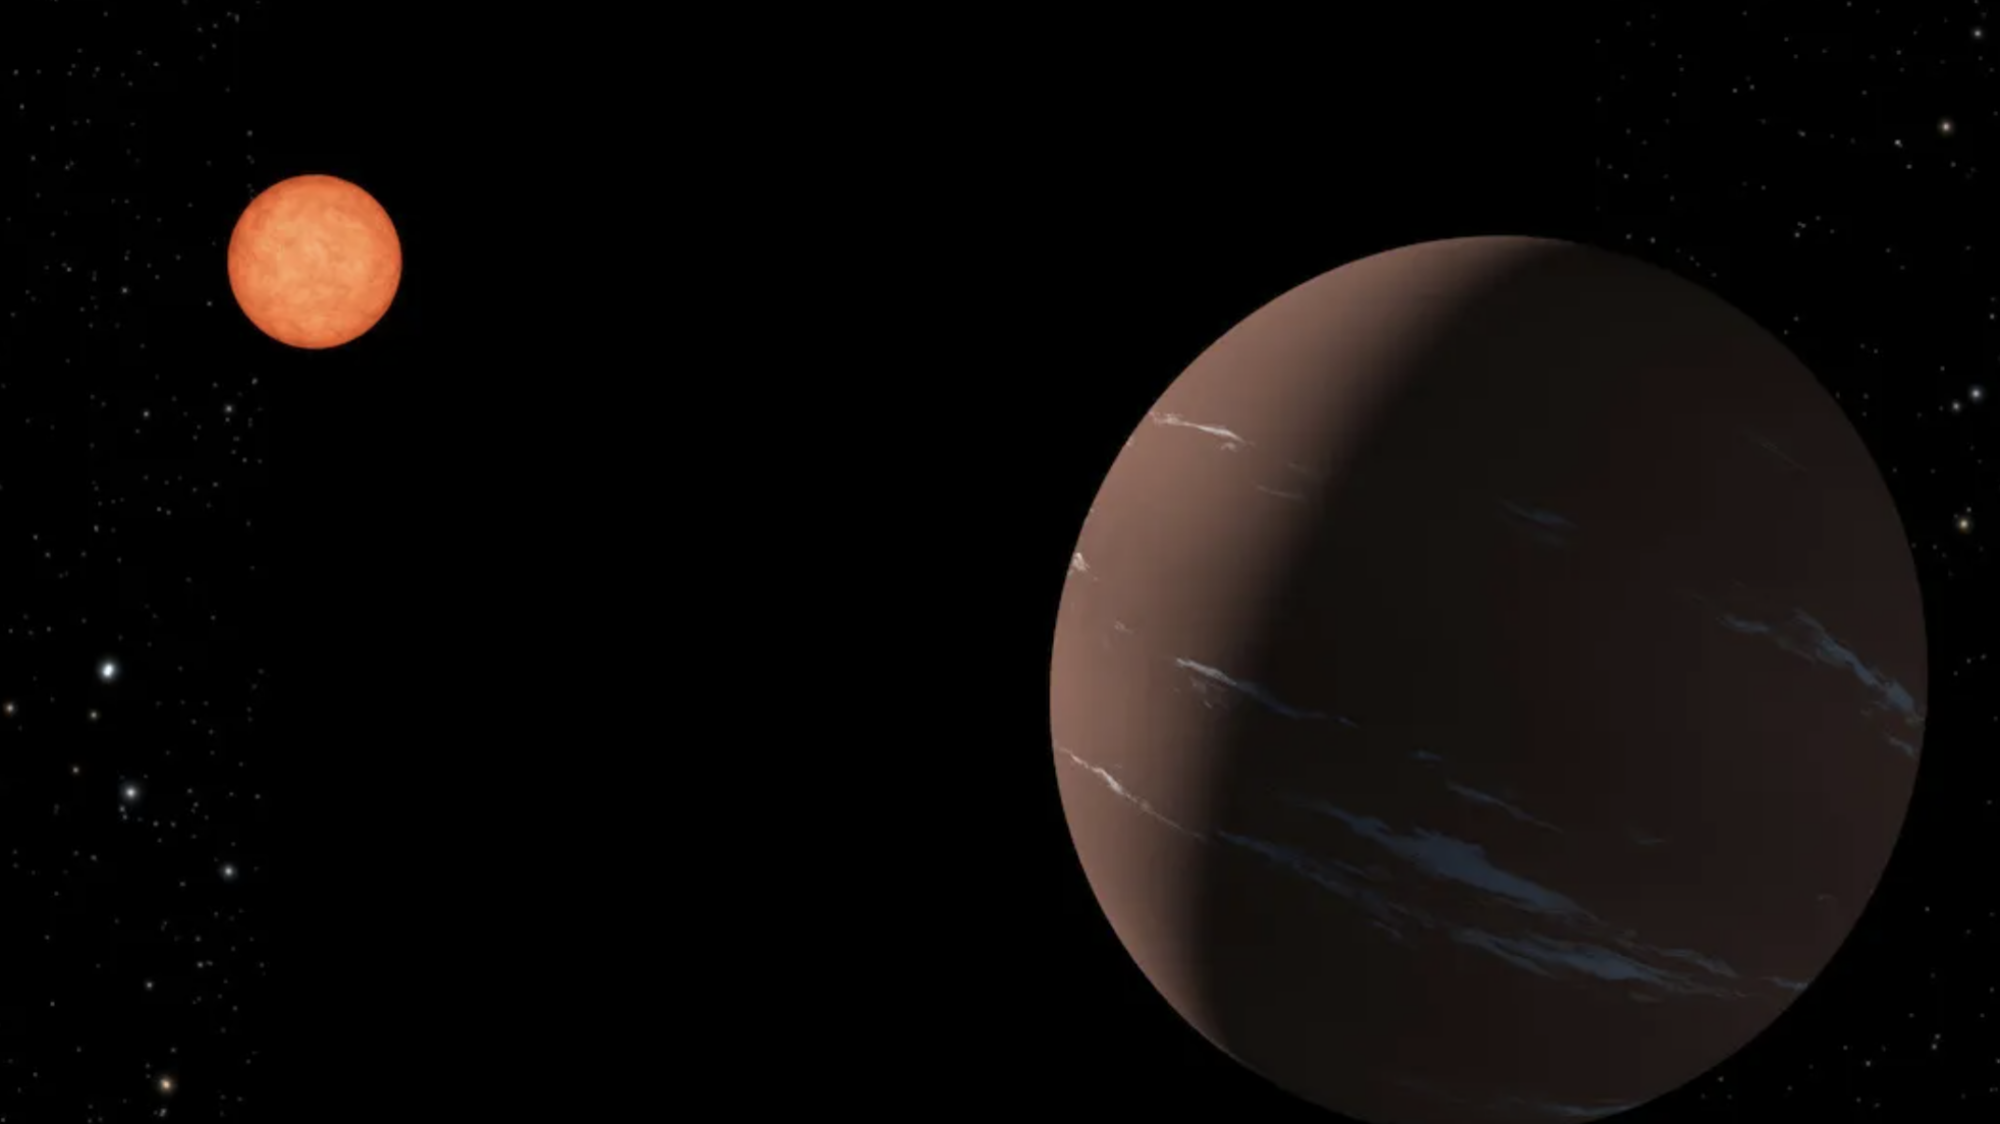 An artist's conception of the super-Earth TOI-715 b.